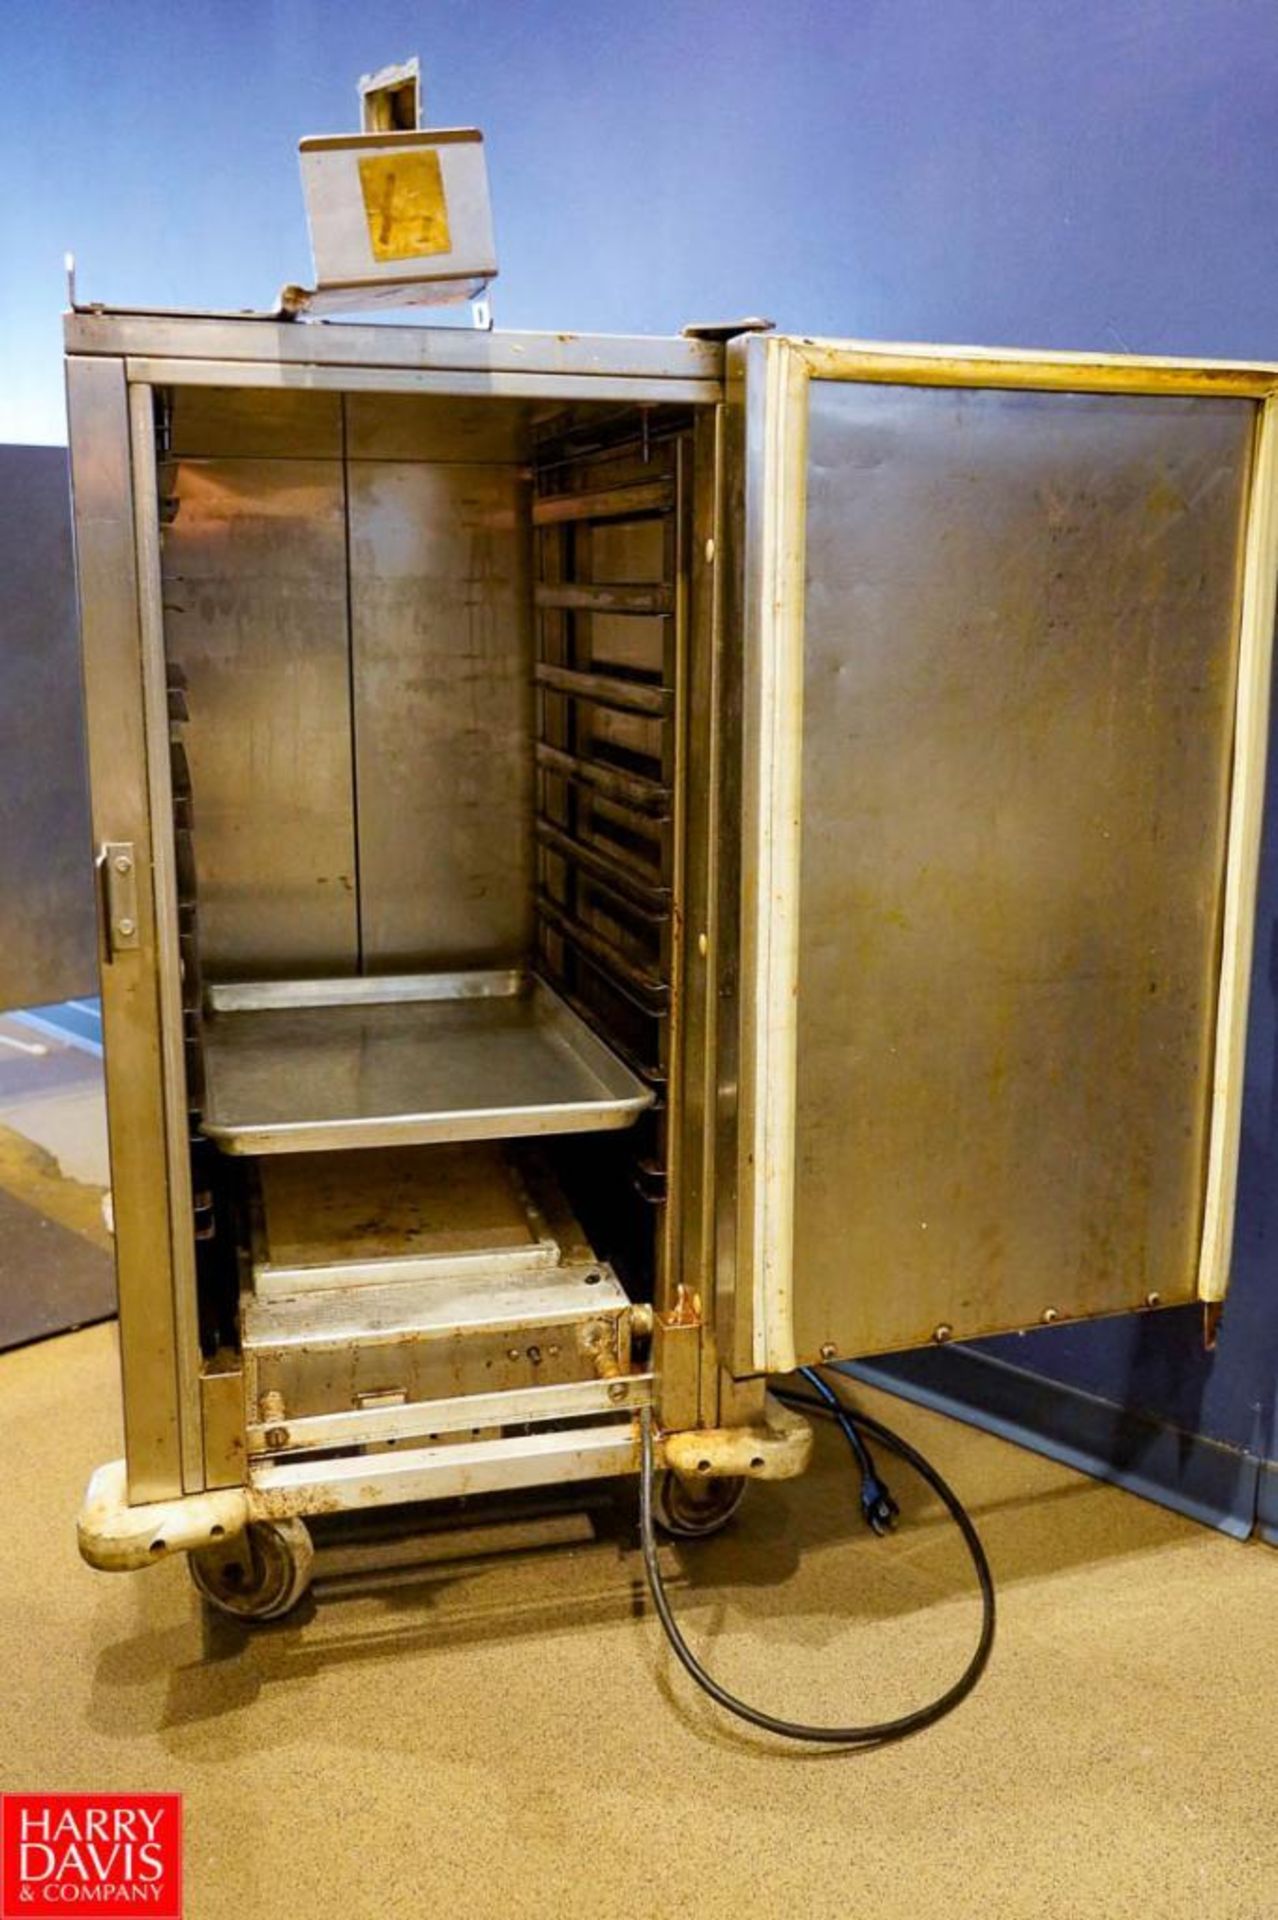 Carter Hoffmann Cook and Holding Oven 25'' x 17'' x 35'' Tall, 8 Tray Capacity, Cooking Temp 100-325 - Image 3 of 4